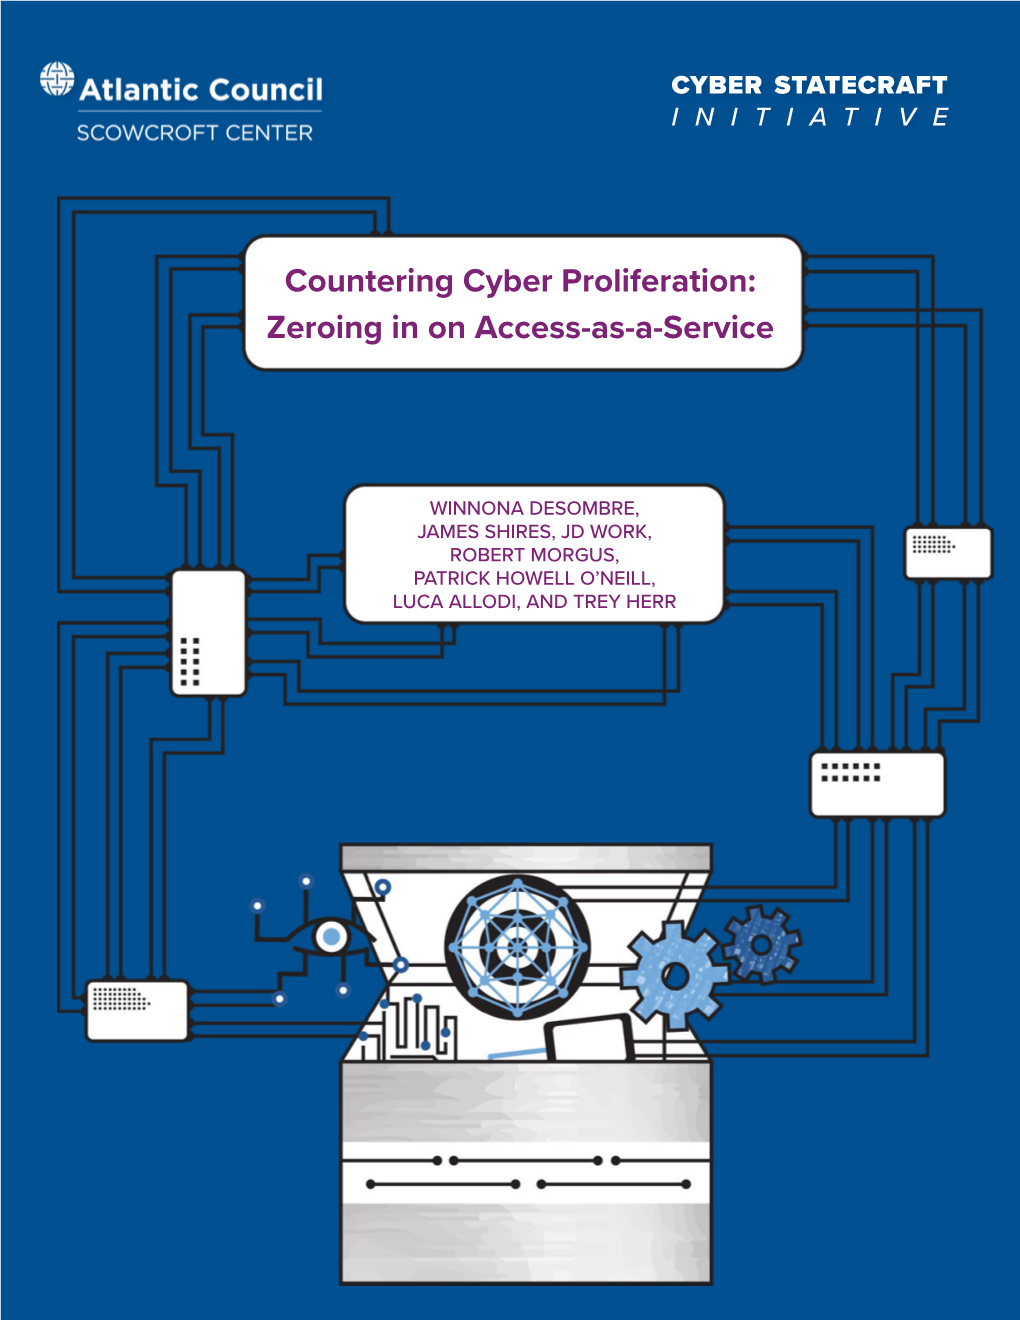 Countering Cyber Proliferation: Zeroing in on Access-As-A-Service